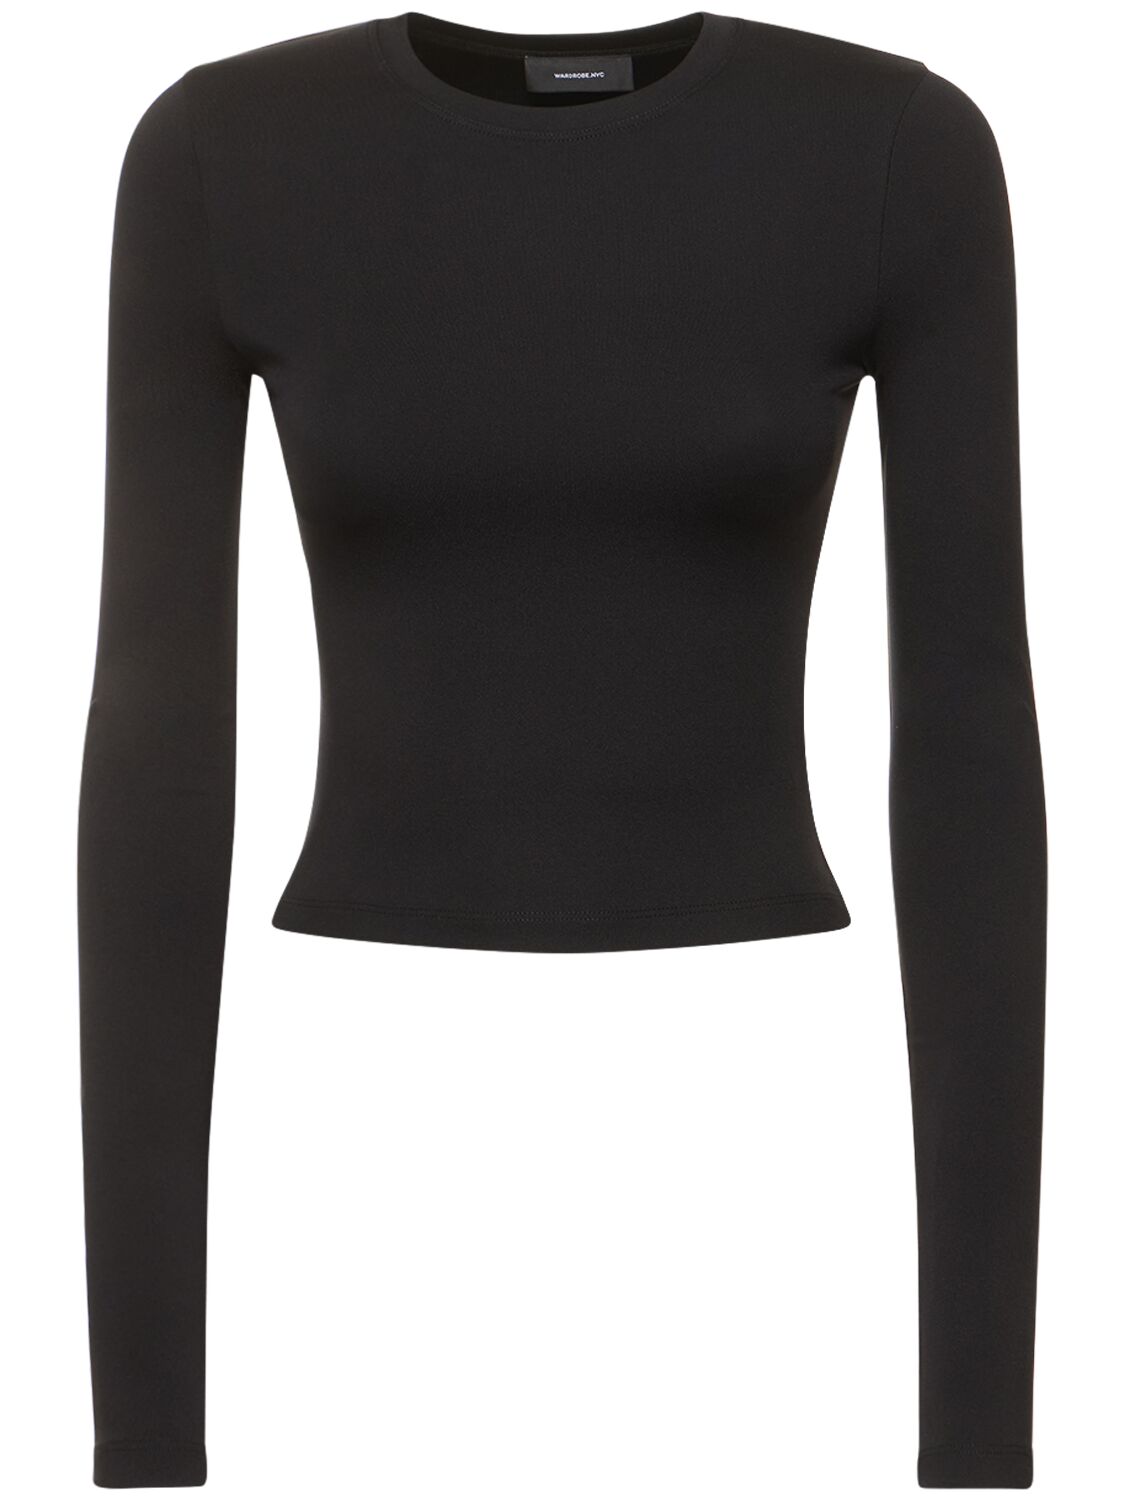 Wardrobe.nyc Opaque Stretch Jersey T-shirt In Black